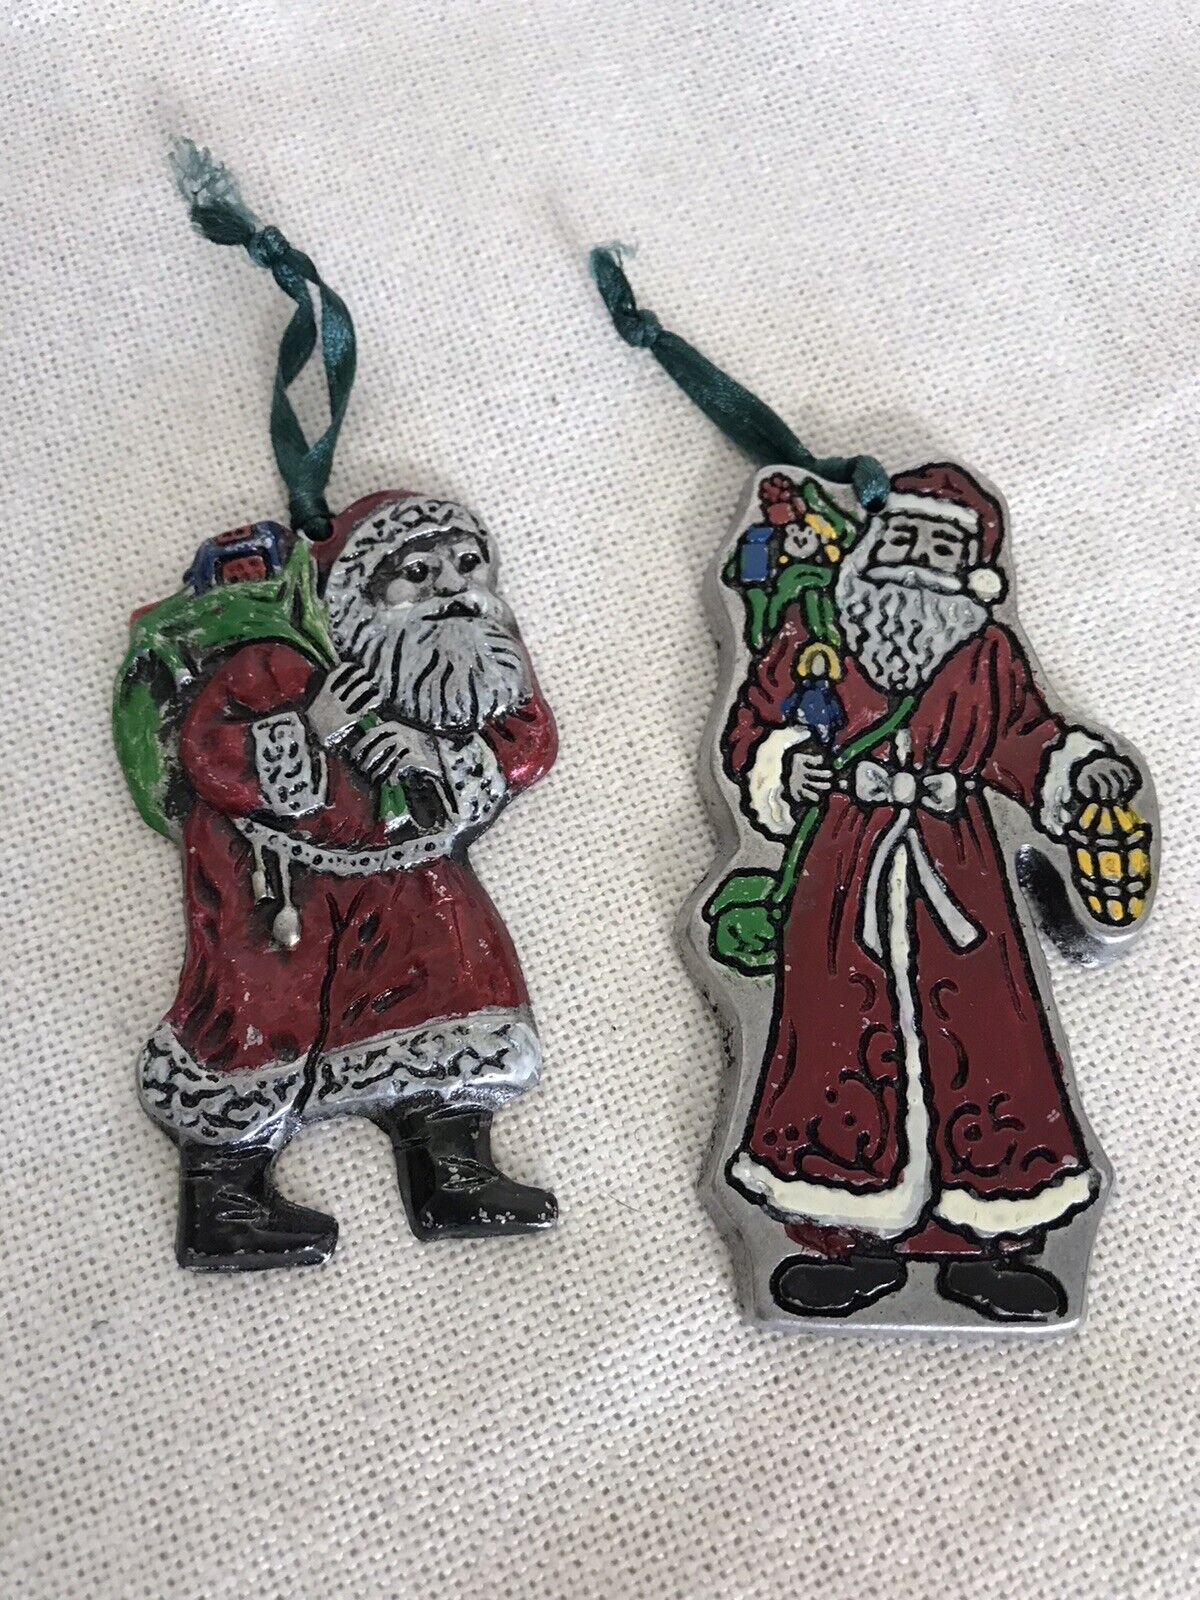 Pewter Santa Claus Christmas Ornaments Carrying Sack Toys Vtg 1990’s Painted